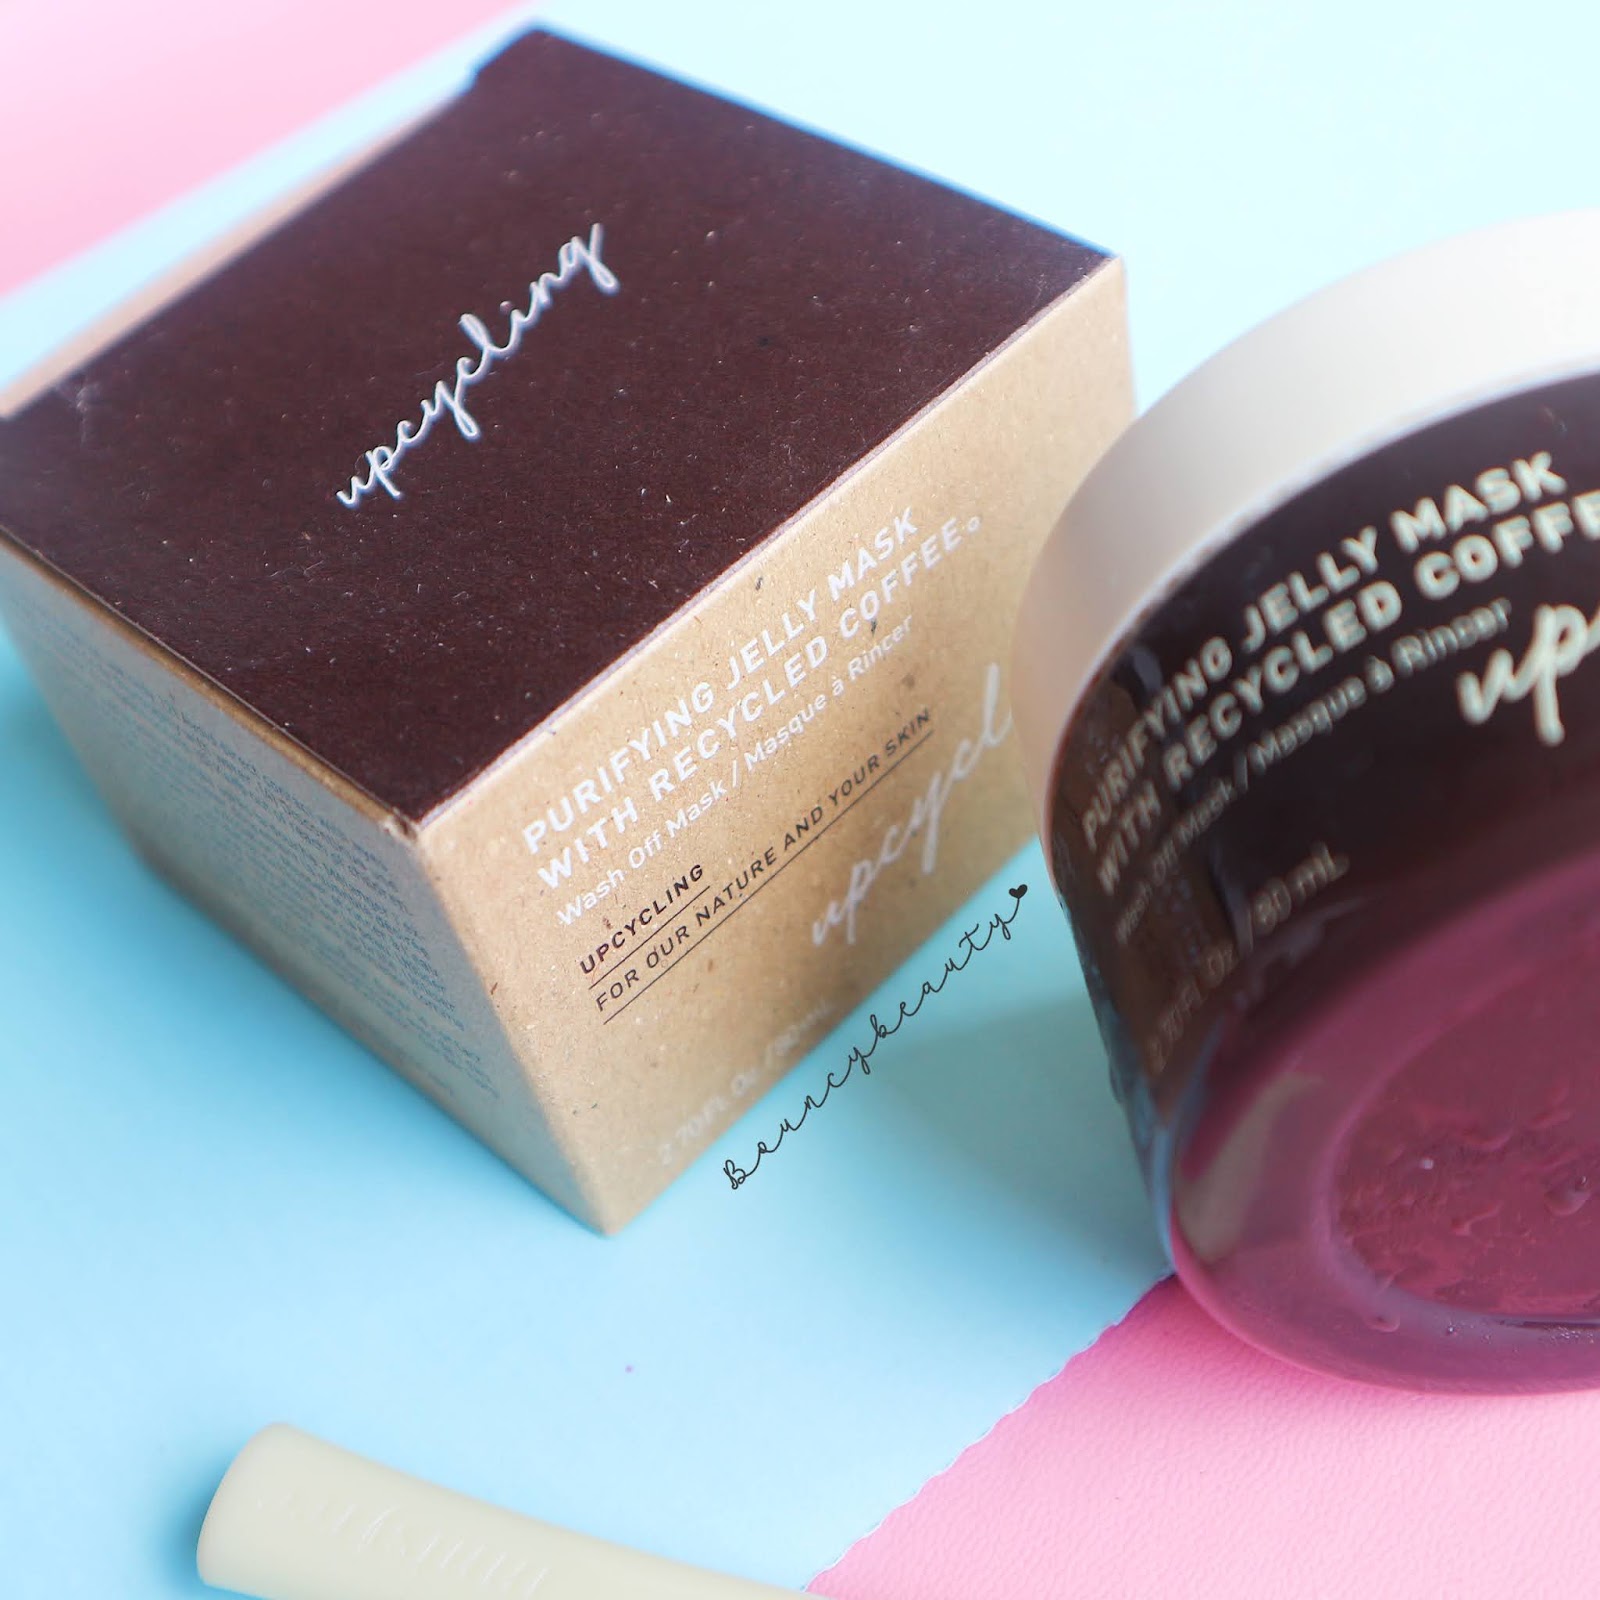  REVIEW Innisfree Purifying Jelly Mask With Recycled 